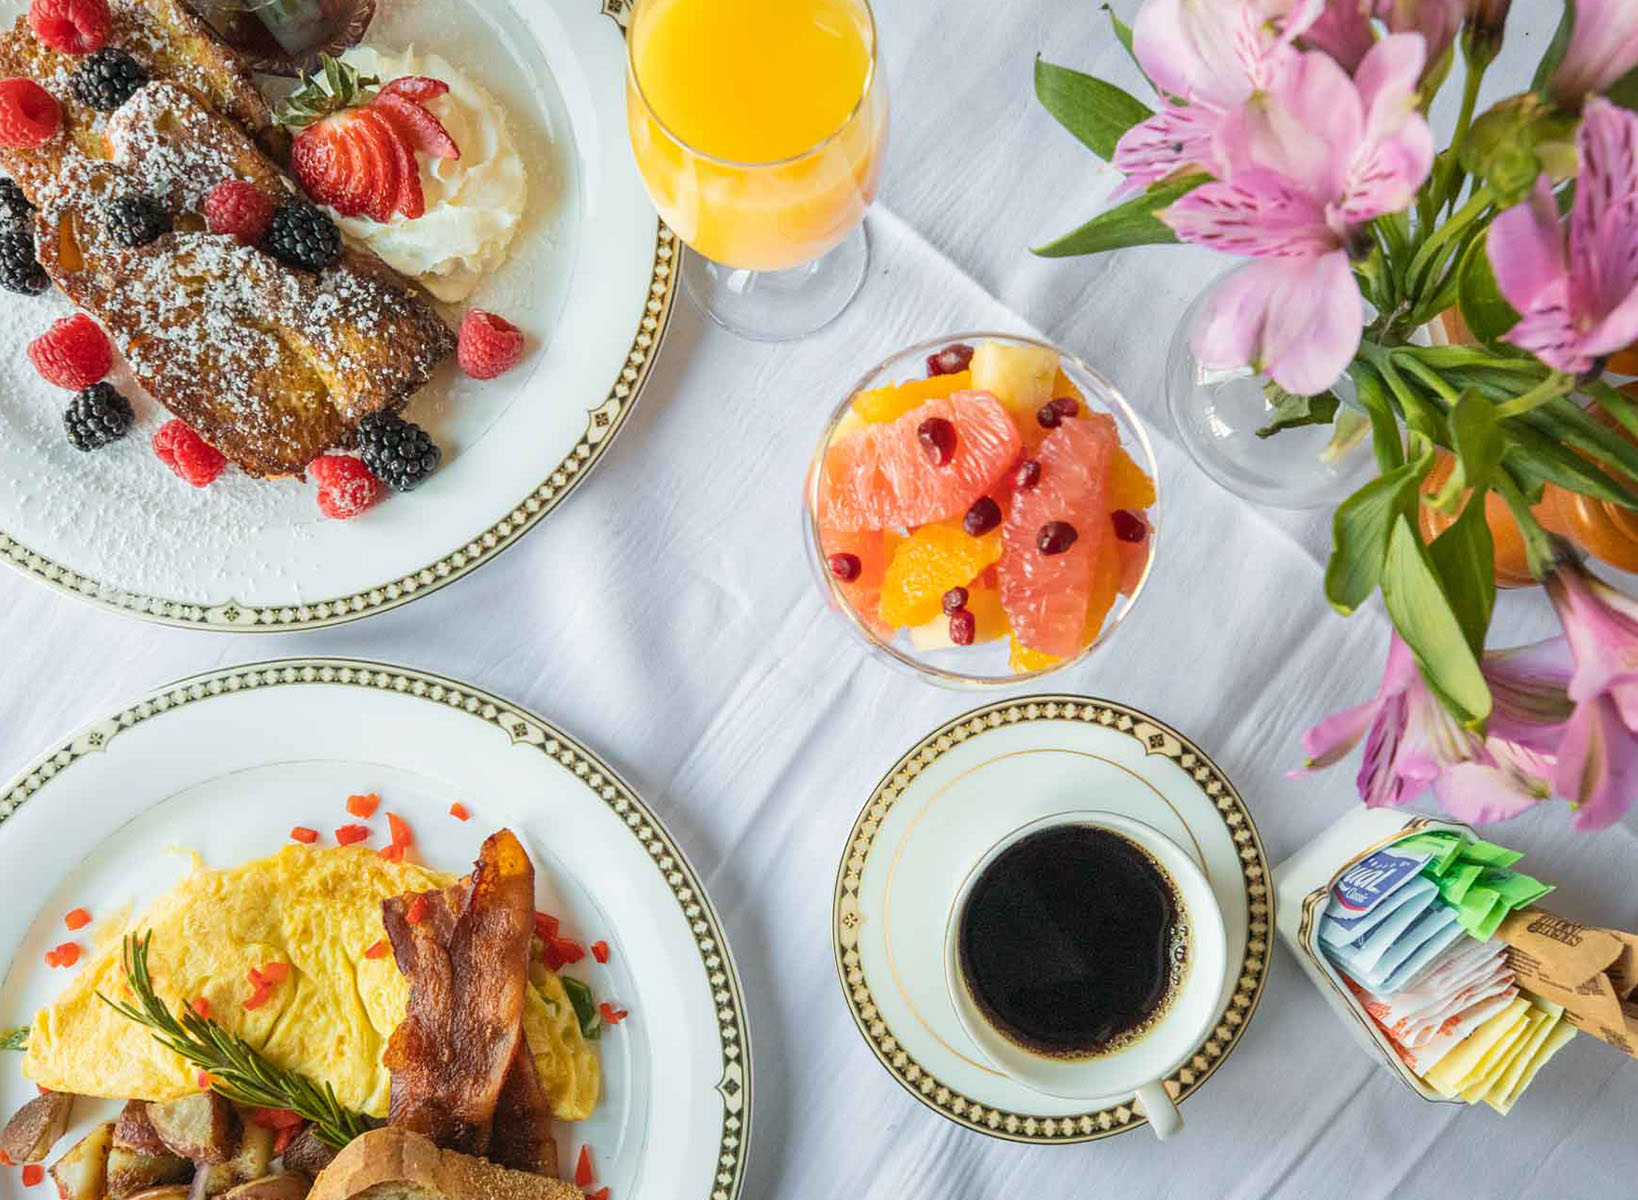 Overhead shot of a full breakfast with coffee, fresh fruit bowl, a plate of eggs and bacon, and a plate of french toast adorned with raspberries and blackberries. There is a vase of fresh pink flowers in water for decoration and a small dish of sugar for the coffee.